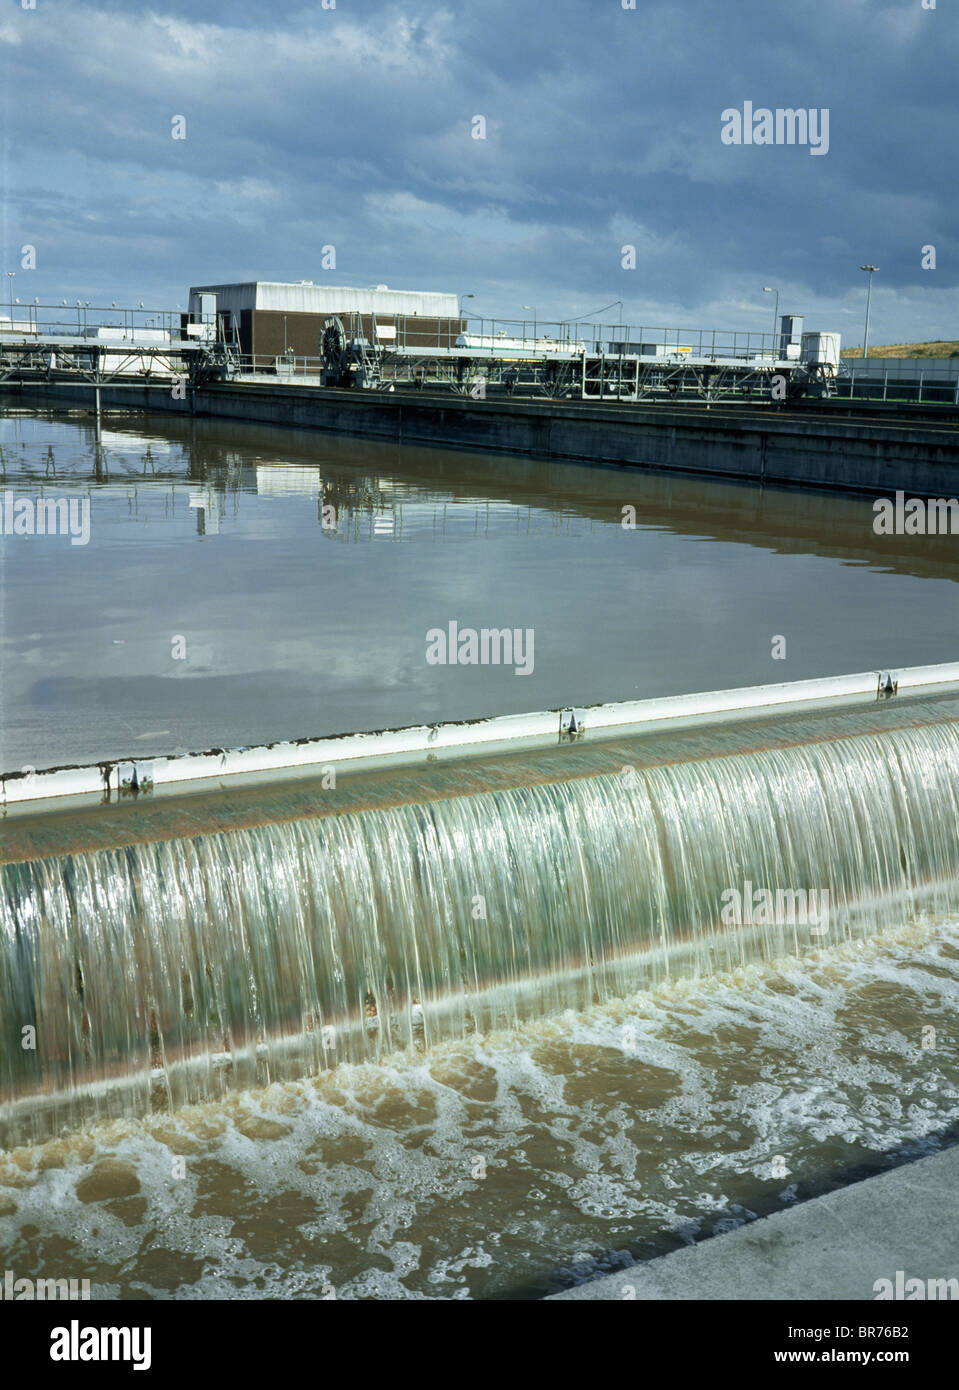 Flowing Water In Industrial Setting, Ireland Stock Photo